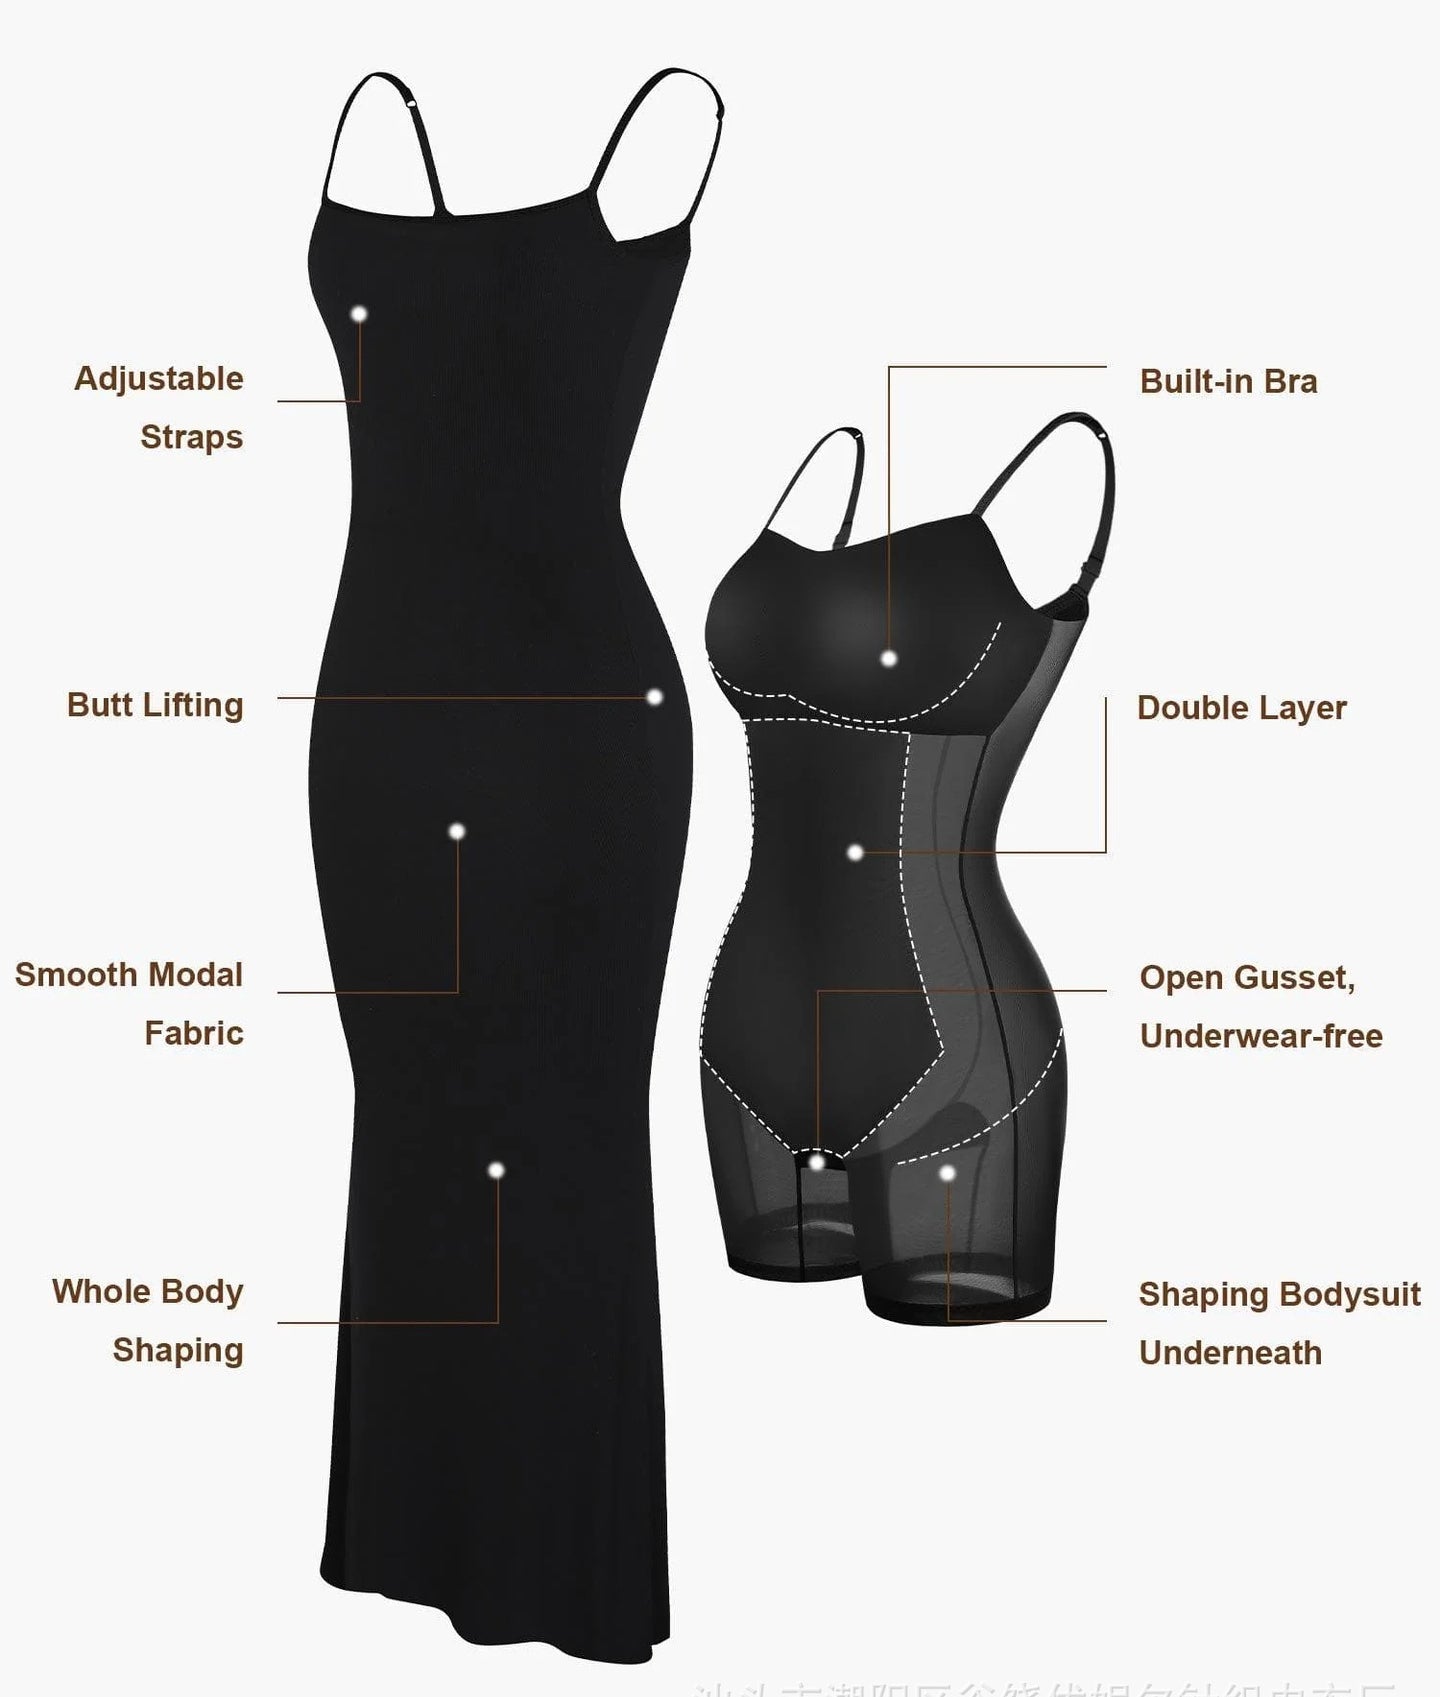 Body Shaper for Women Tummy Control, Summer Clearance Women's Casual  Shapeware Suspender V-neck Sleeveless Casual Vest Top Corset Body Shaping  Garment